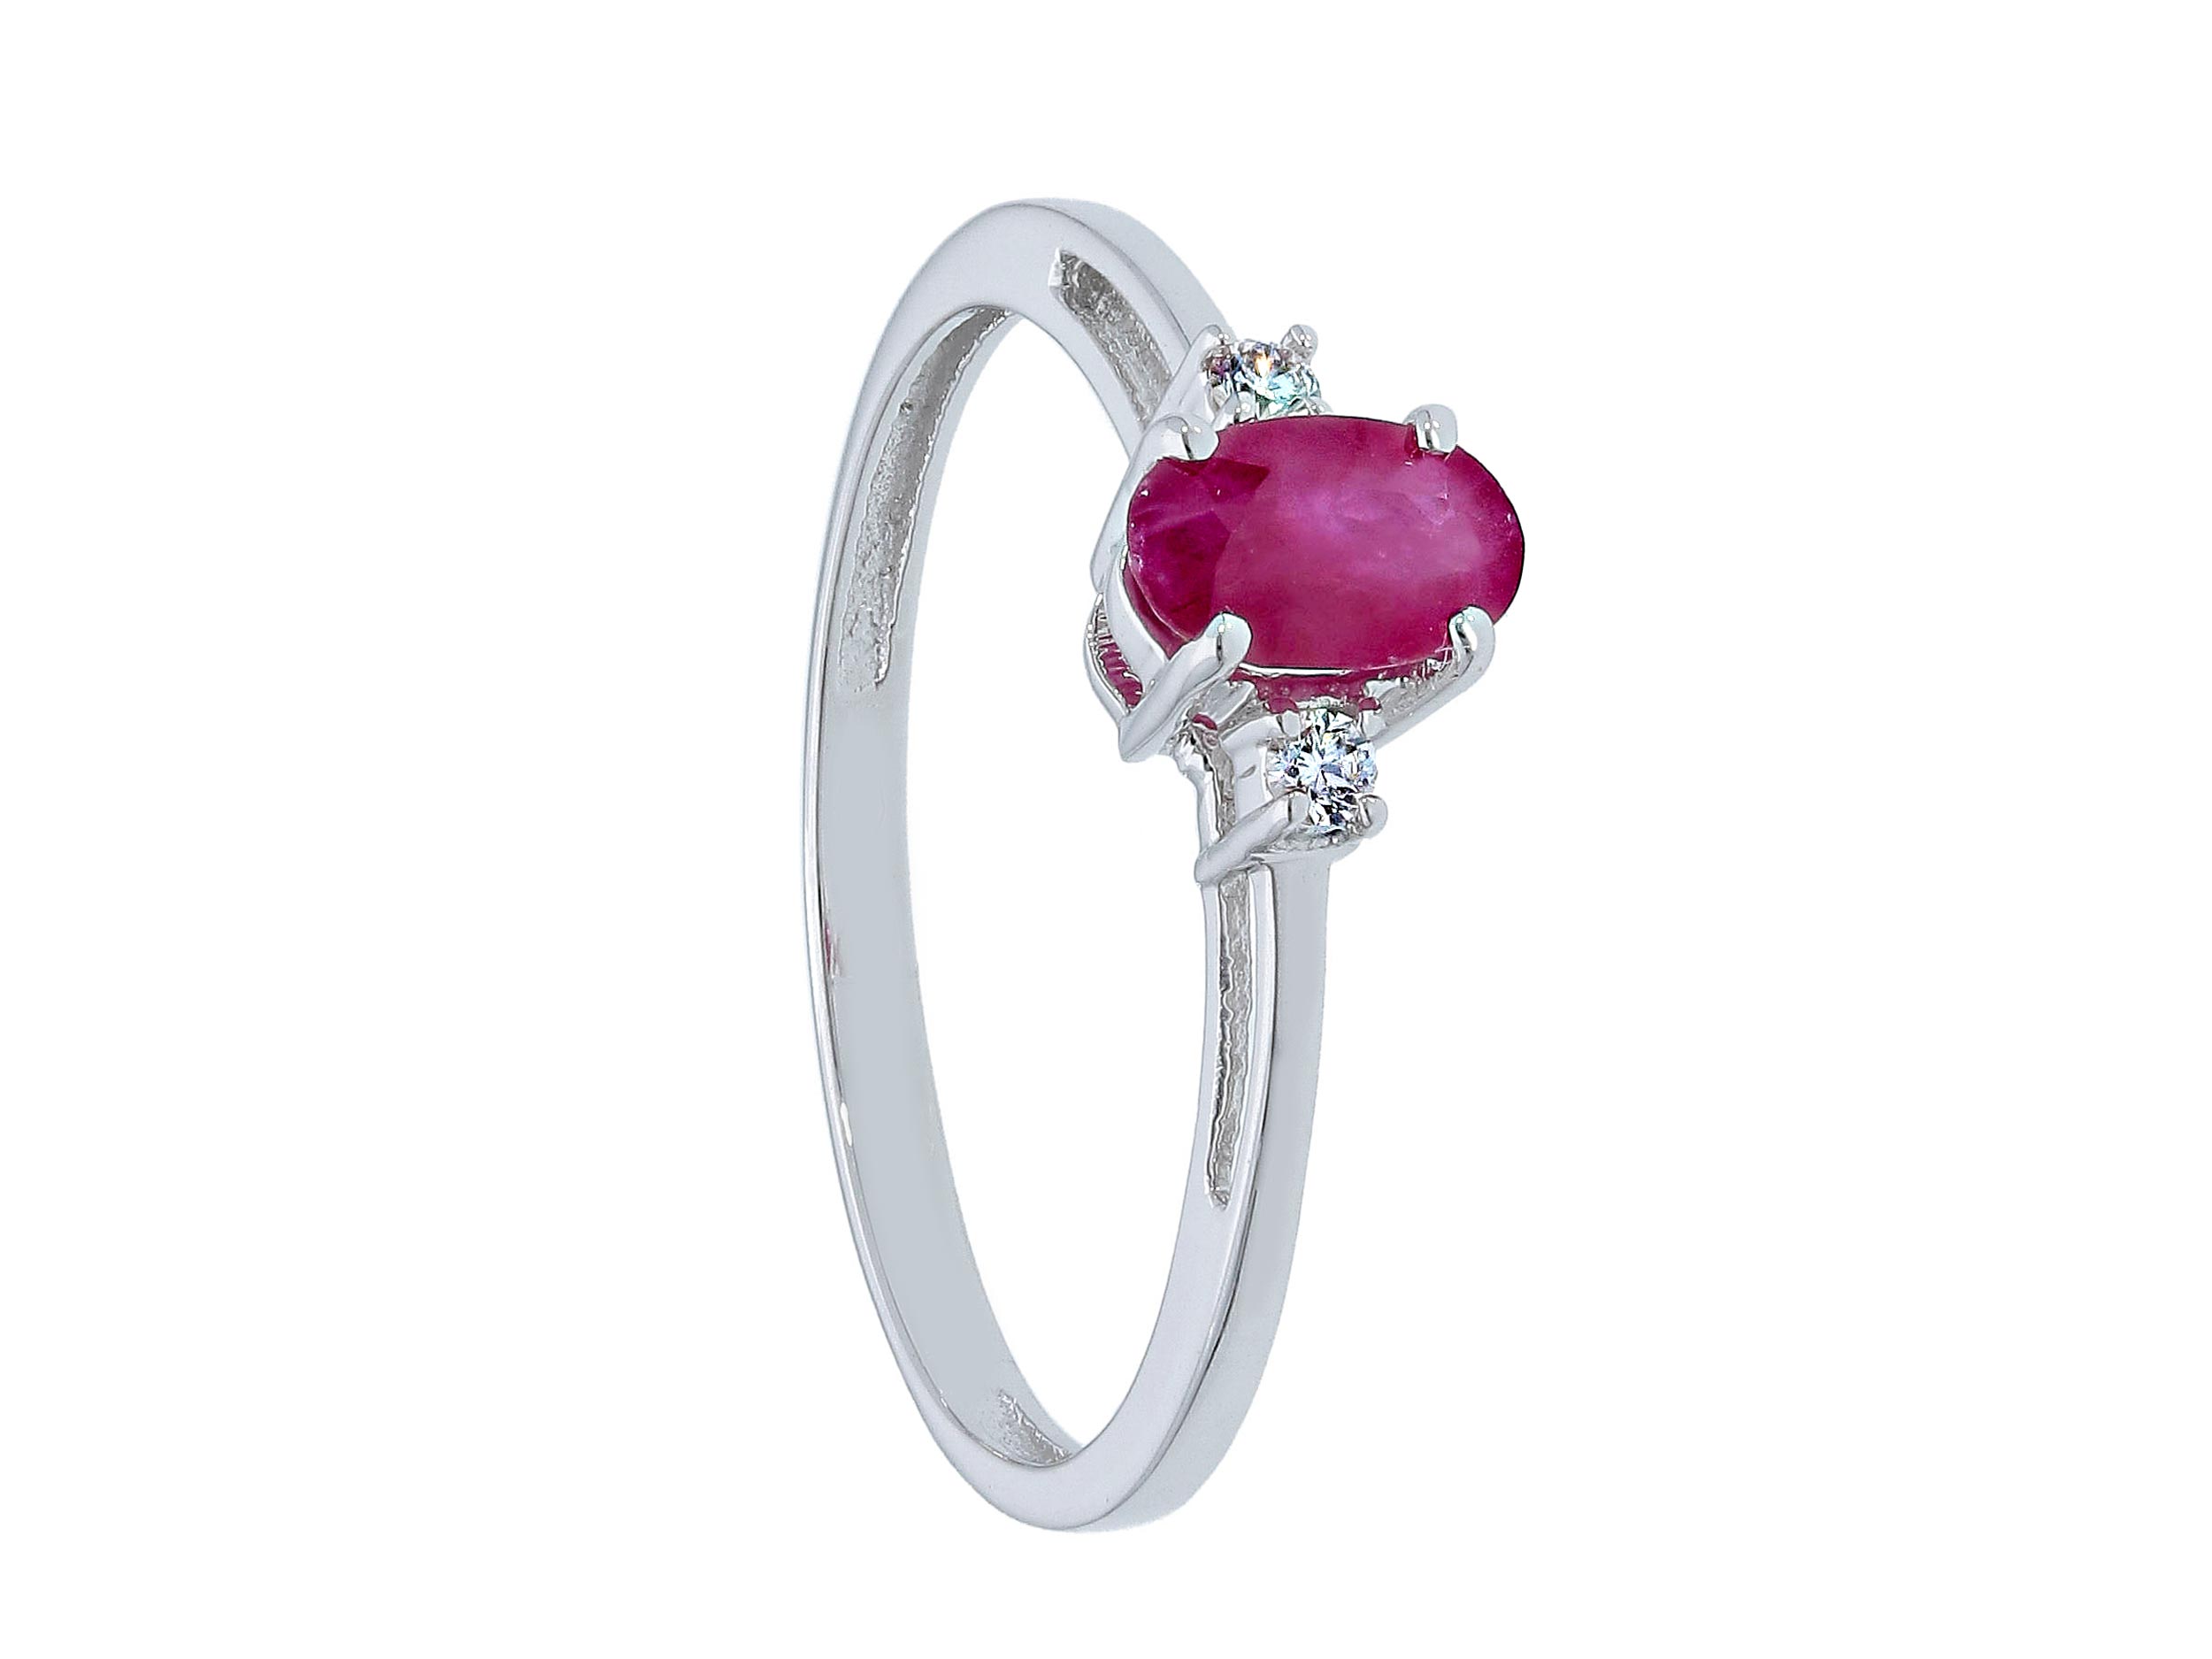 GOLD RING – RUBIES AND DIAMONDS ITEM CODE 121799